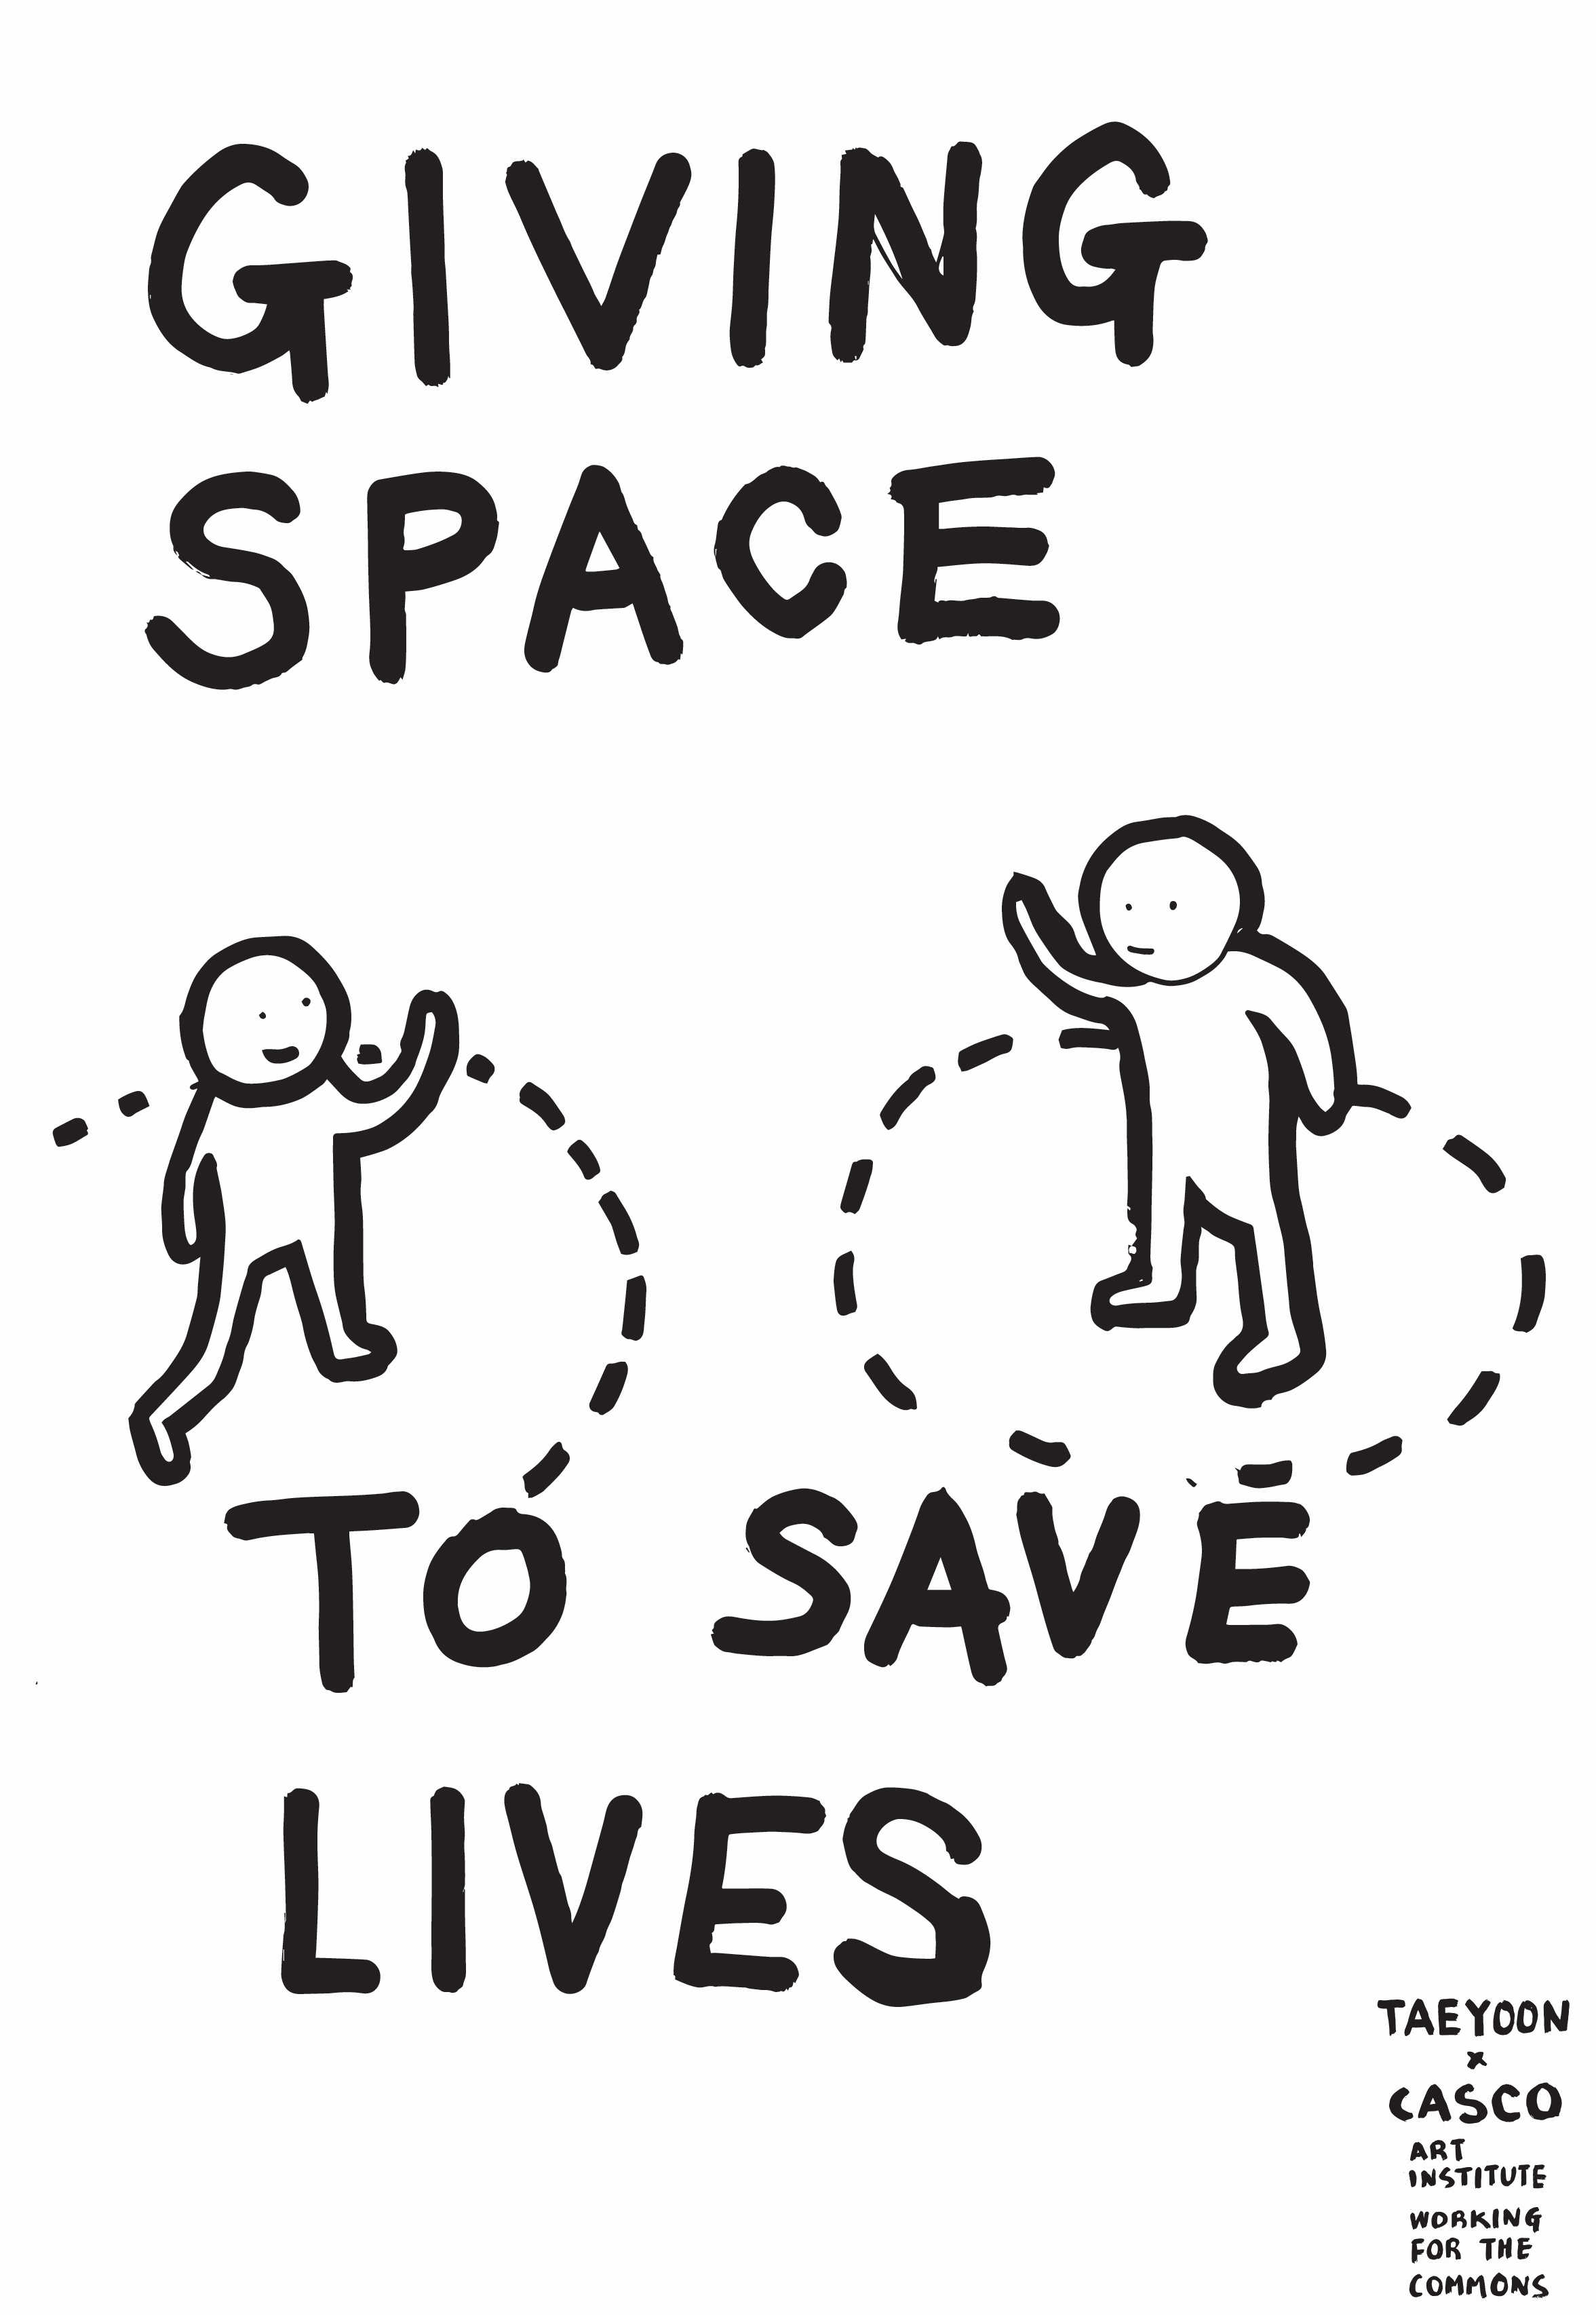 Giving Space To Safe Lives